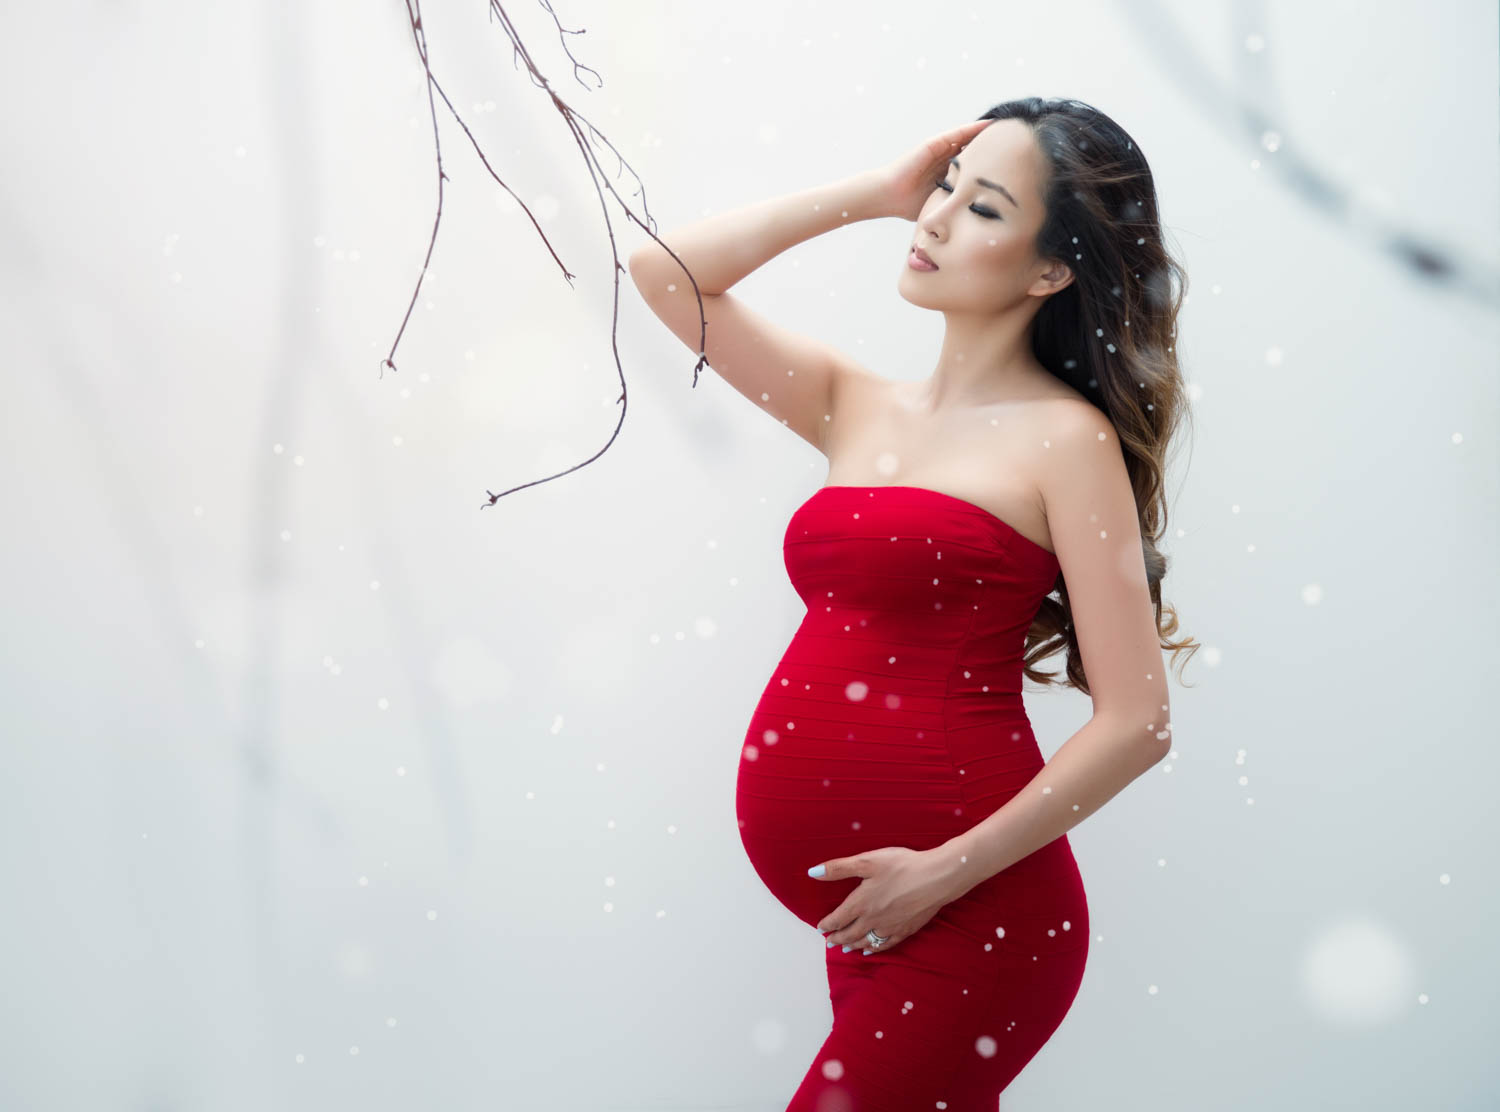 red gown and winter scene creates a beautiful contrast for a maternity portrait